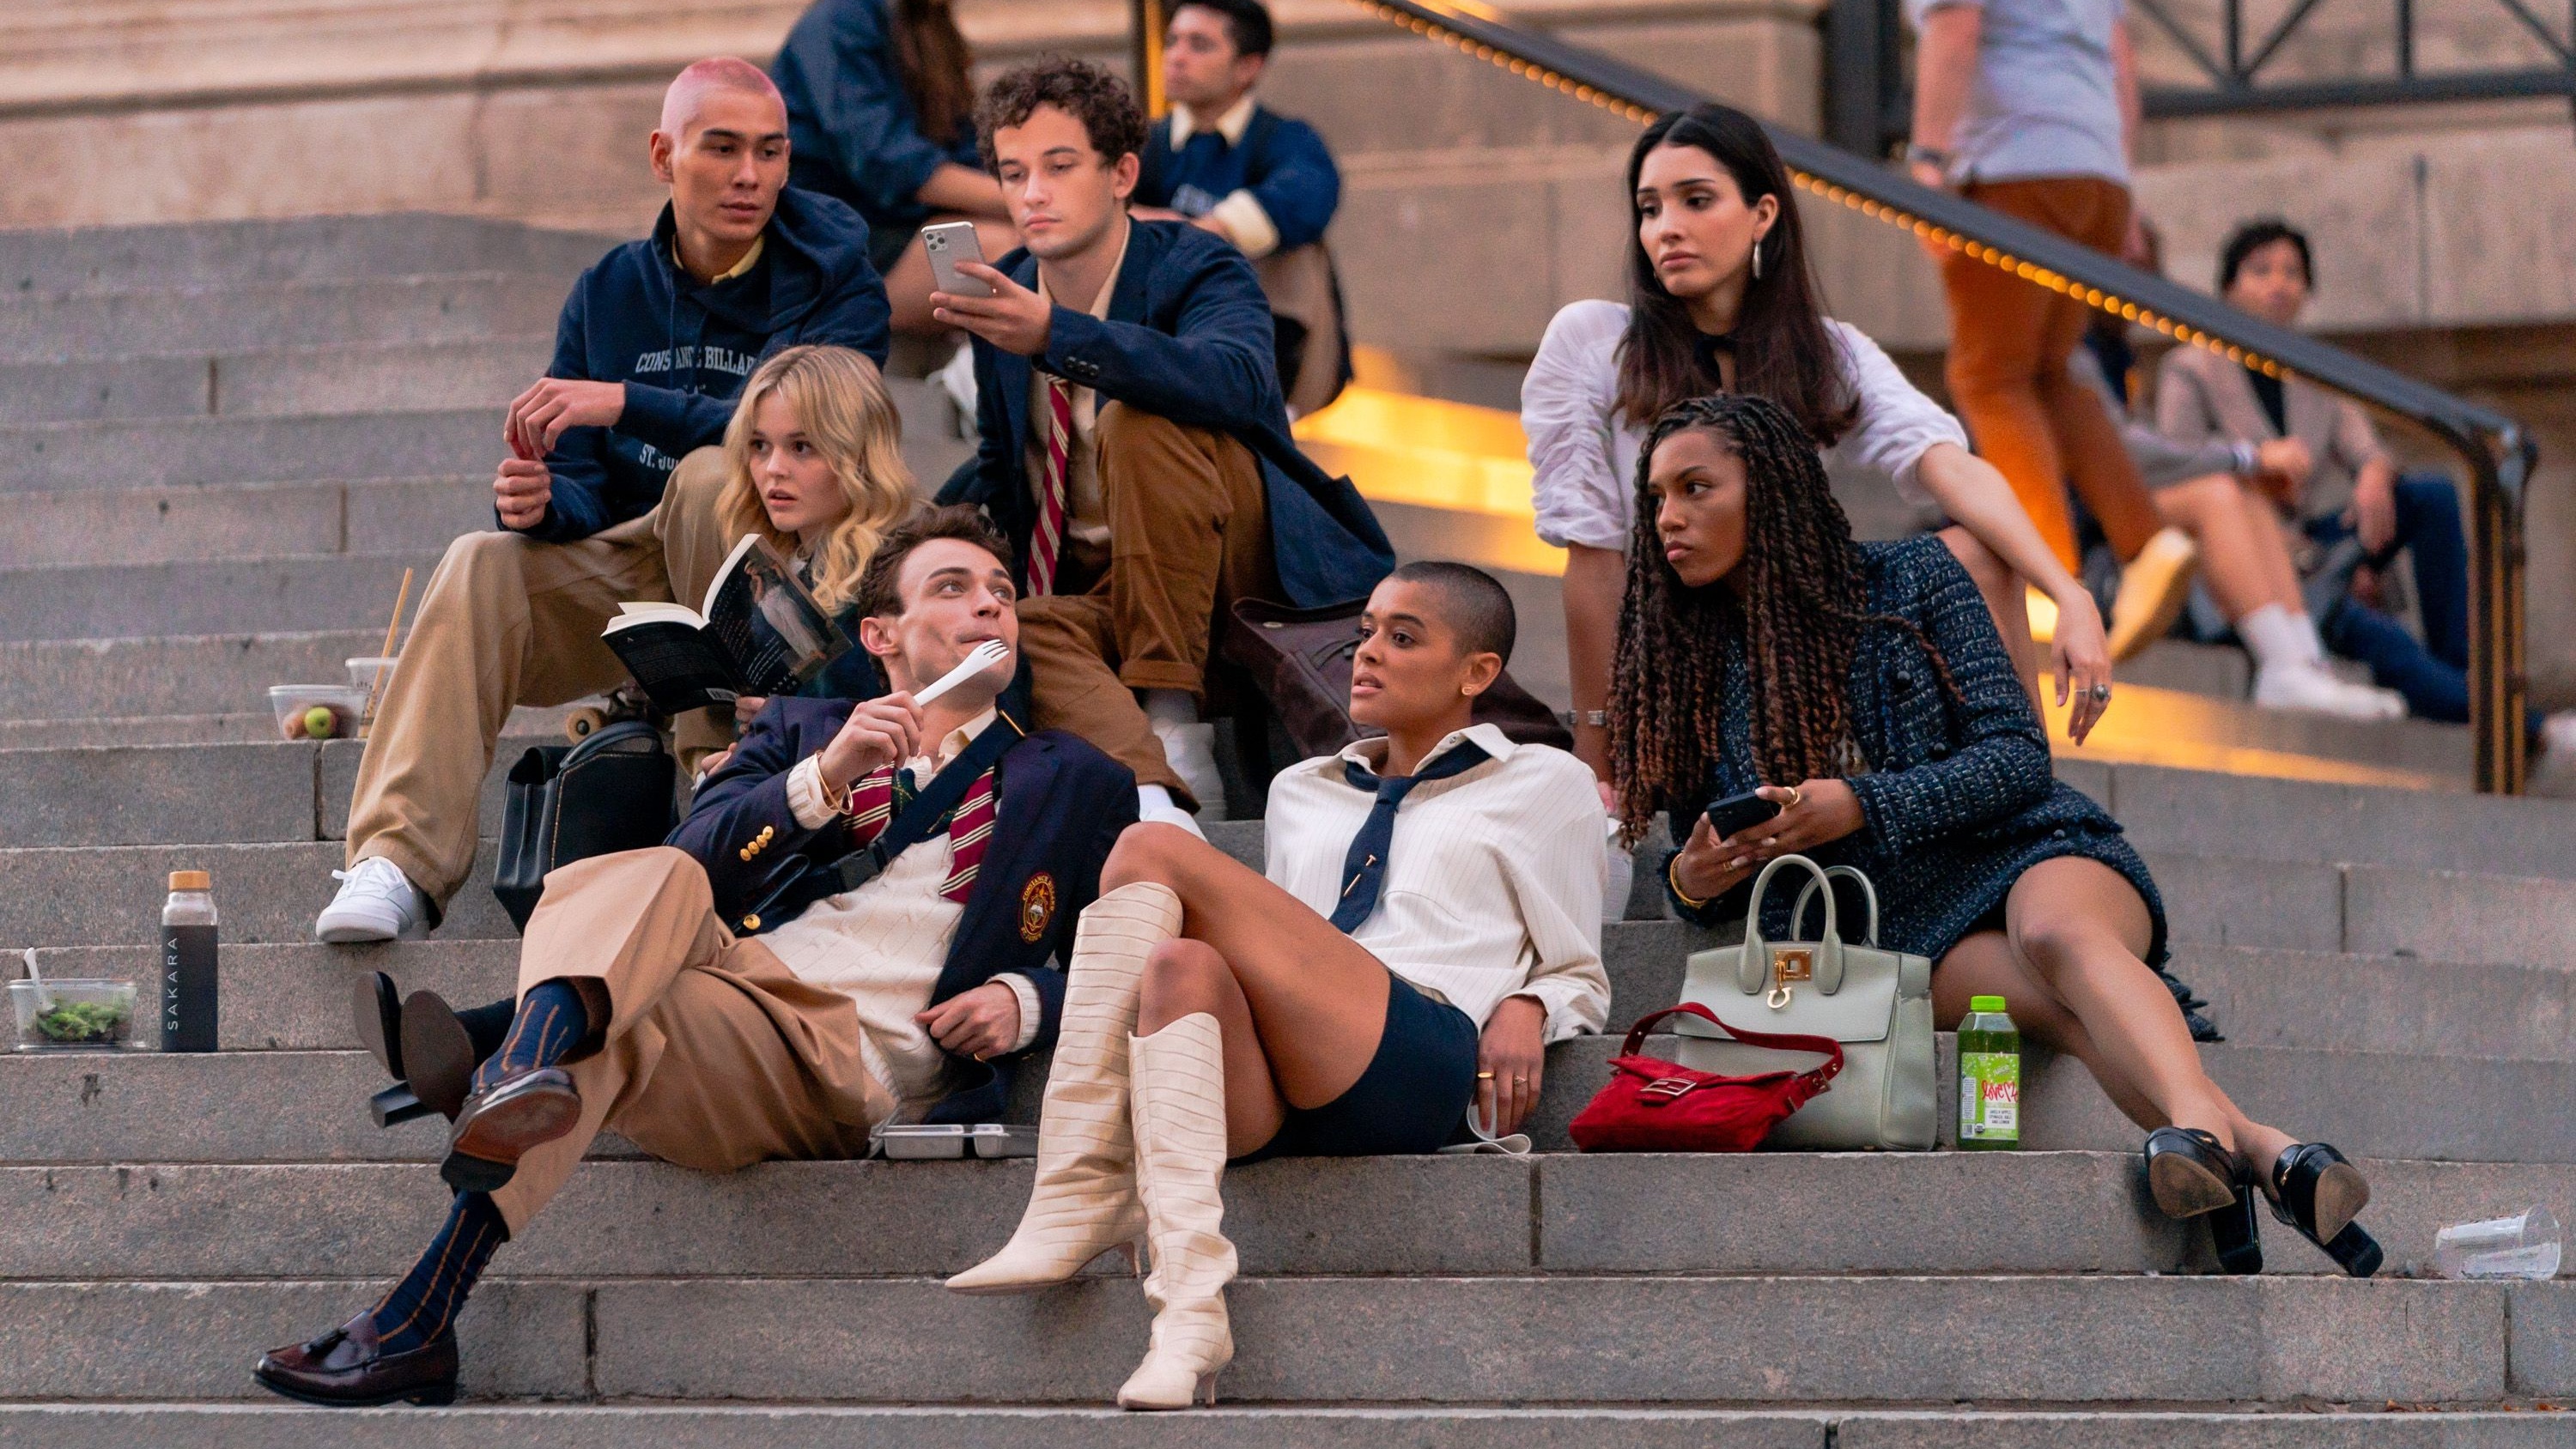 The First Look At The New Gossip Girl Filming In New York City